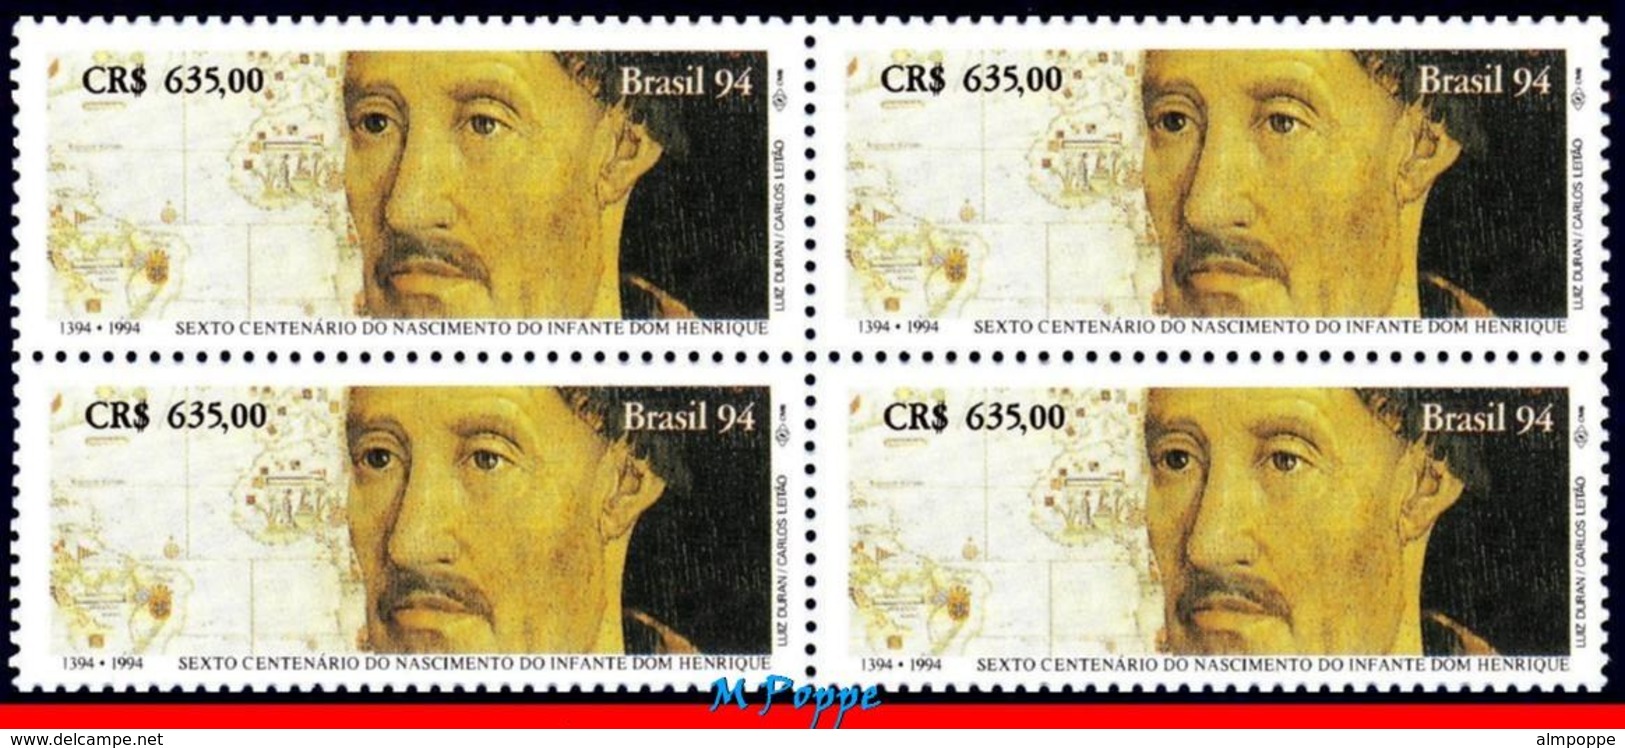 Ref. BR-2463-Q BRAZIL 1994 JOINT ISSUE, WITH PORTUGAL,INFANT DOM, HENRIQUE, KING, MI# 2570, BLOCK MNH 4V Sc# 2463 - Unused Stamps